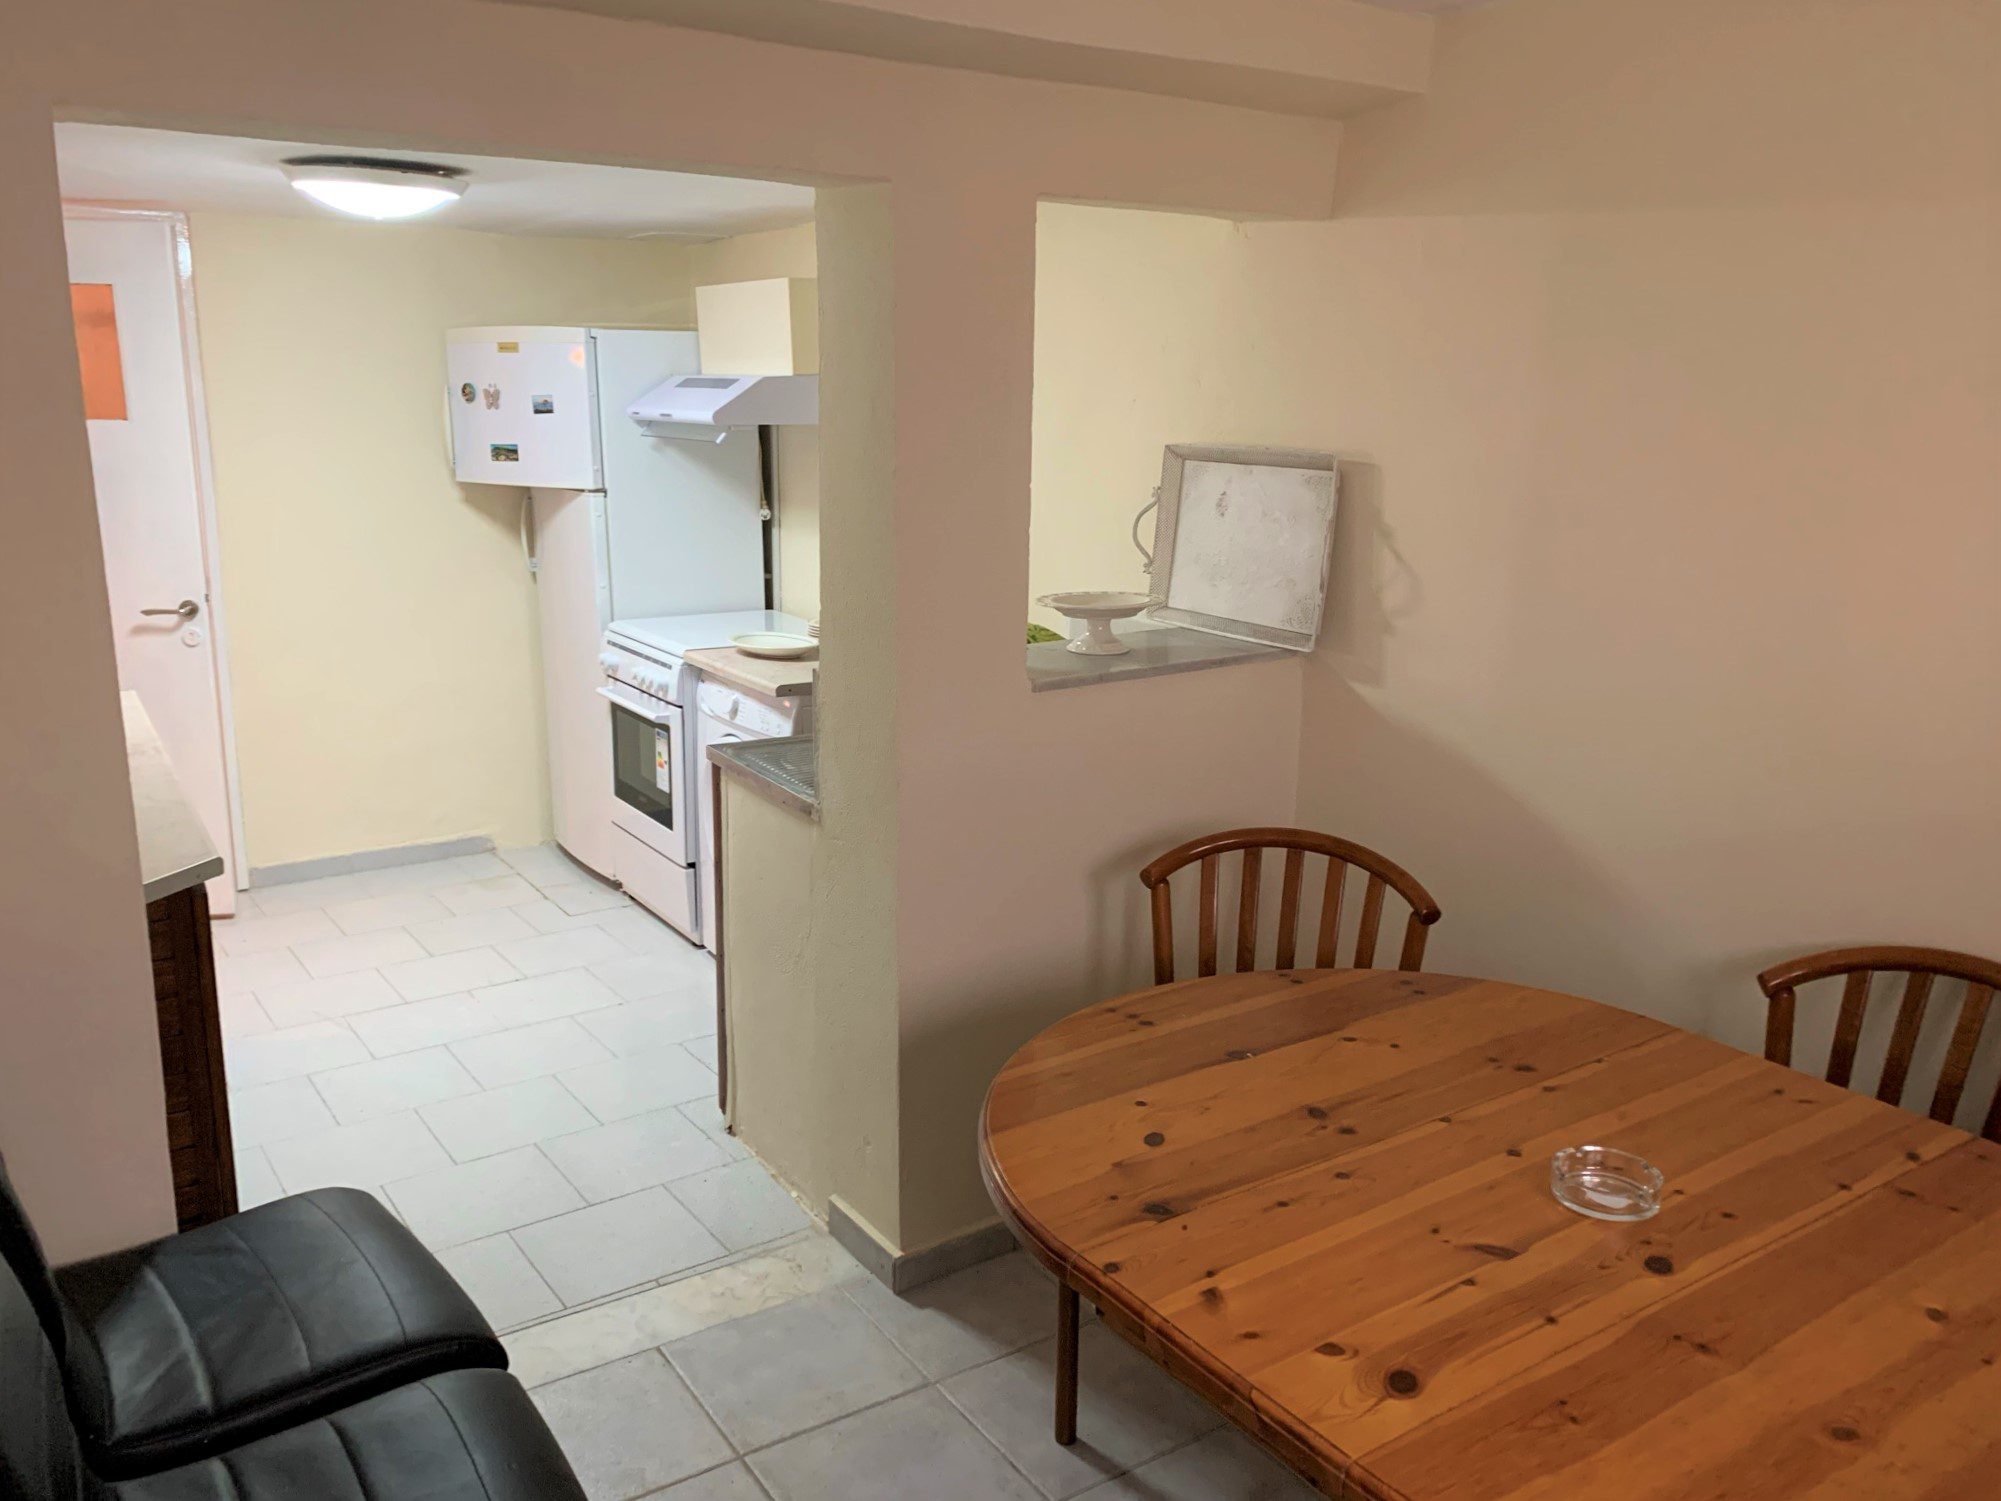 Kitchen of house for sale in Ithaca Greece, Perachori